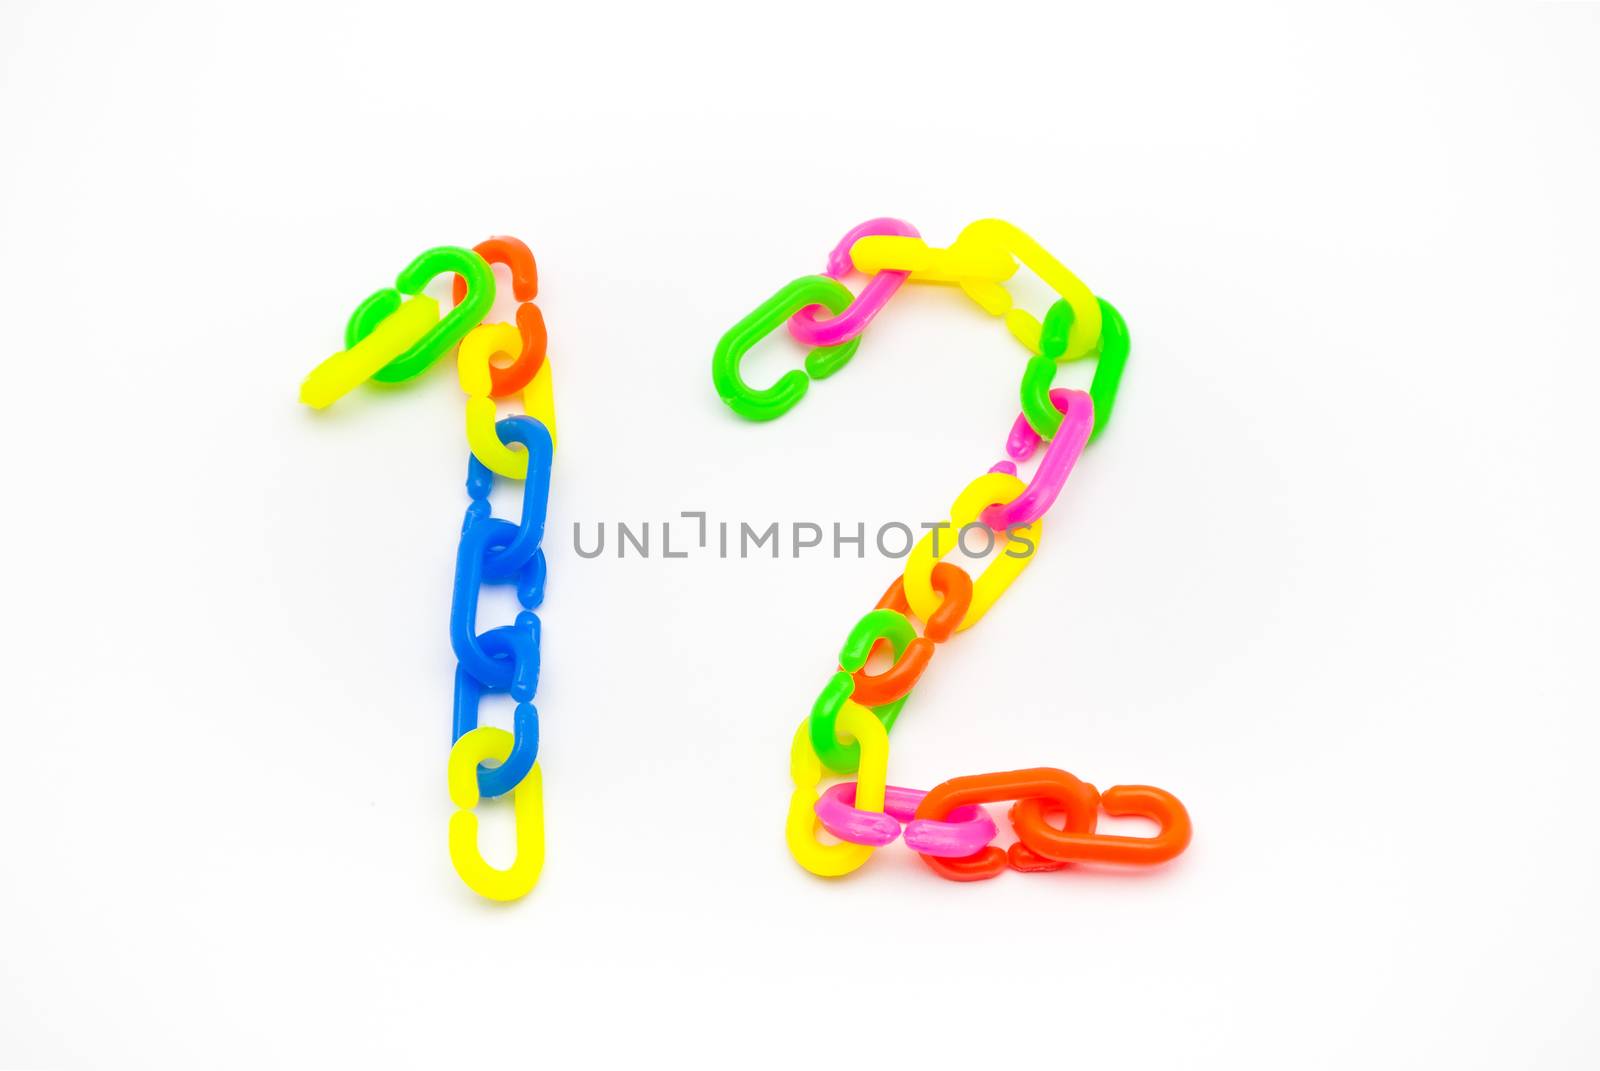 1 and 2 Number, Created by Colorful Plastic Chain.